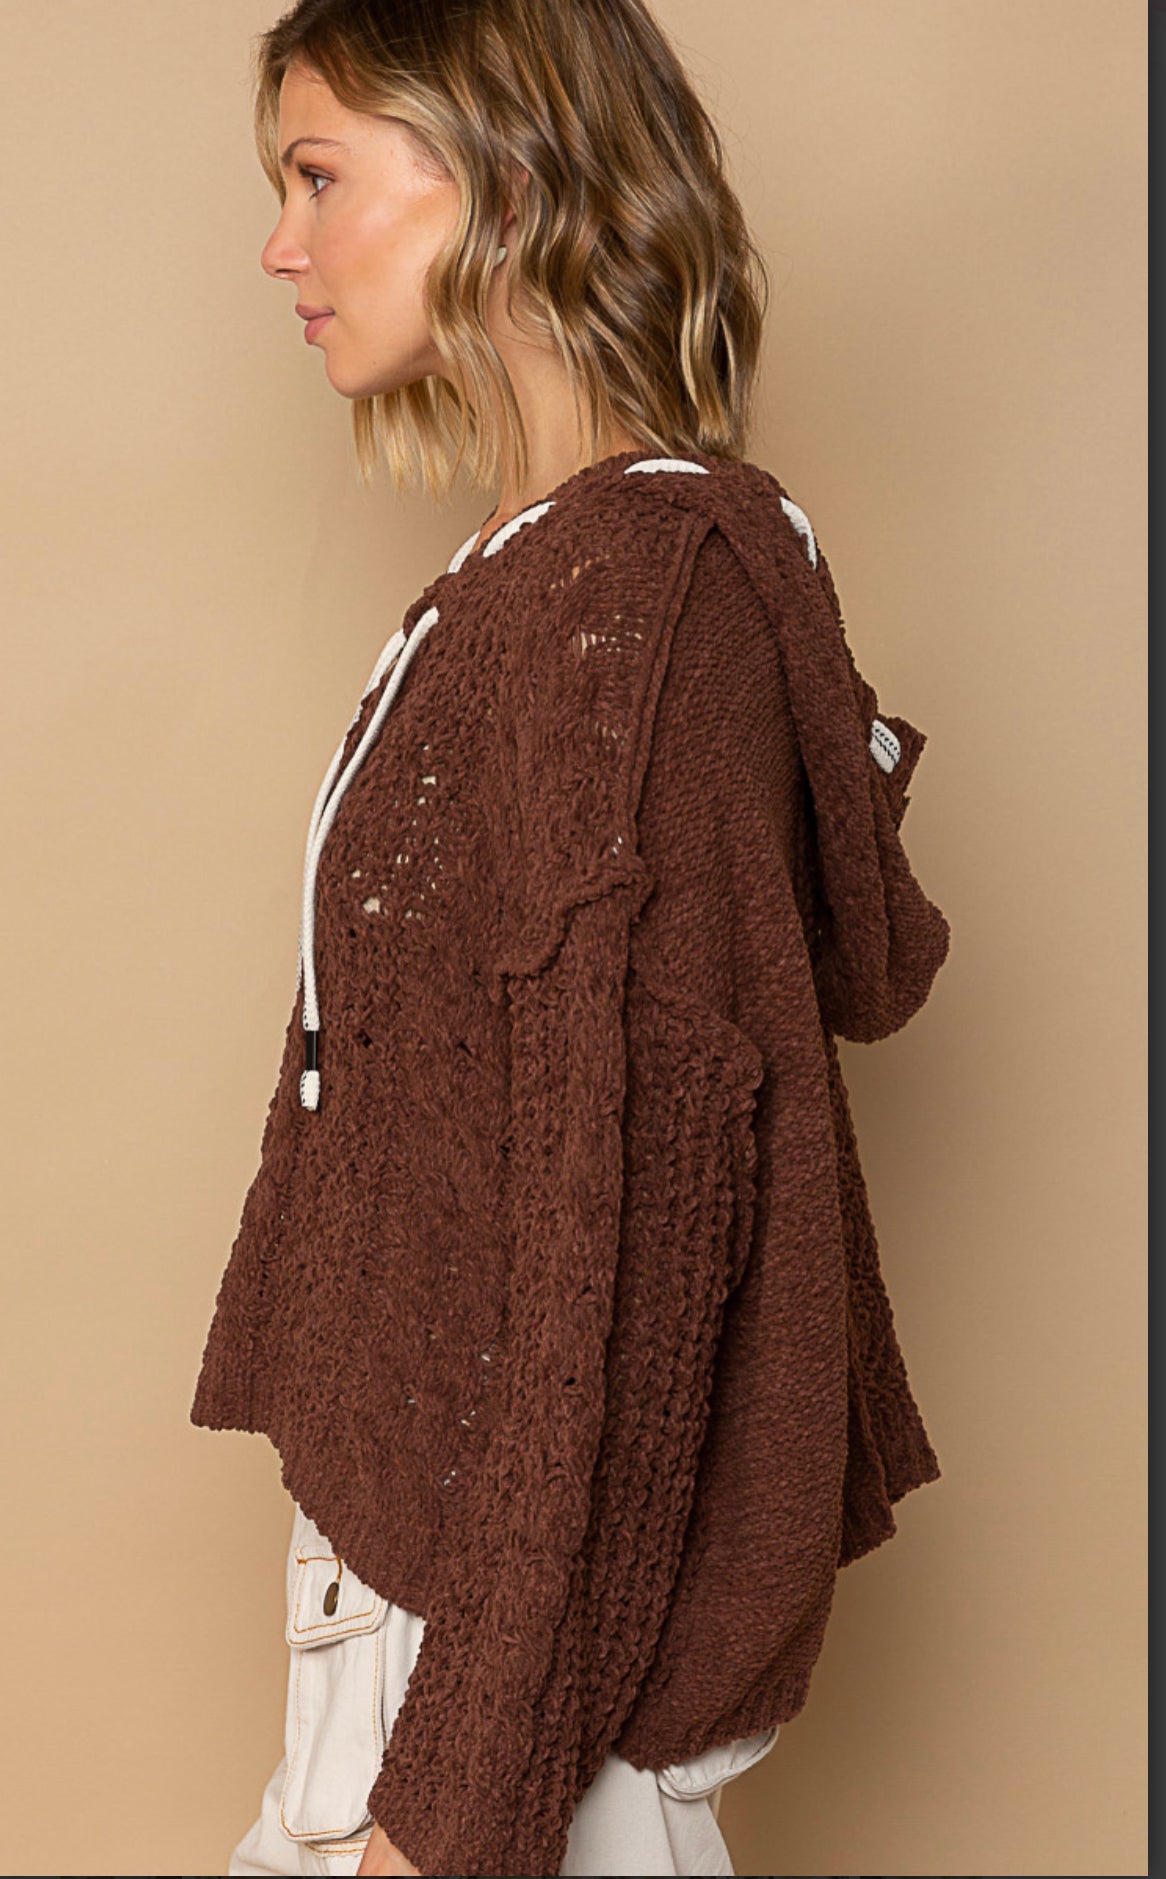 Chenille V-Neck Sweater with Long Sleeves (Deep Chocolate)